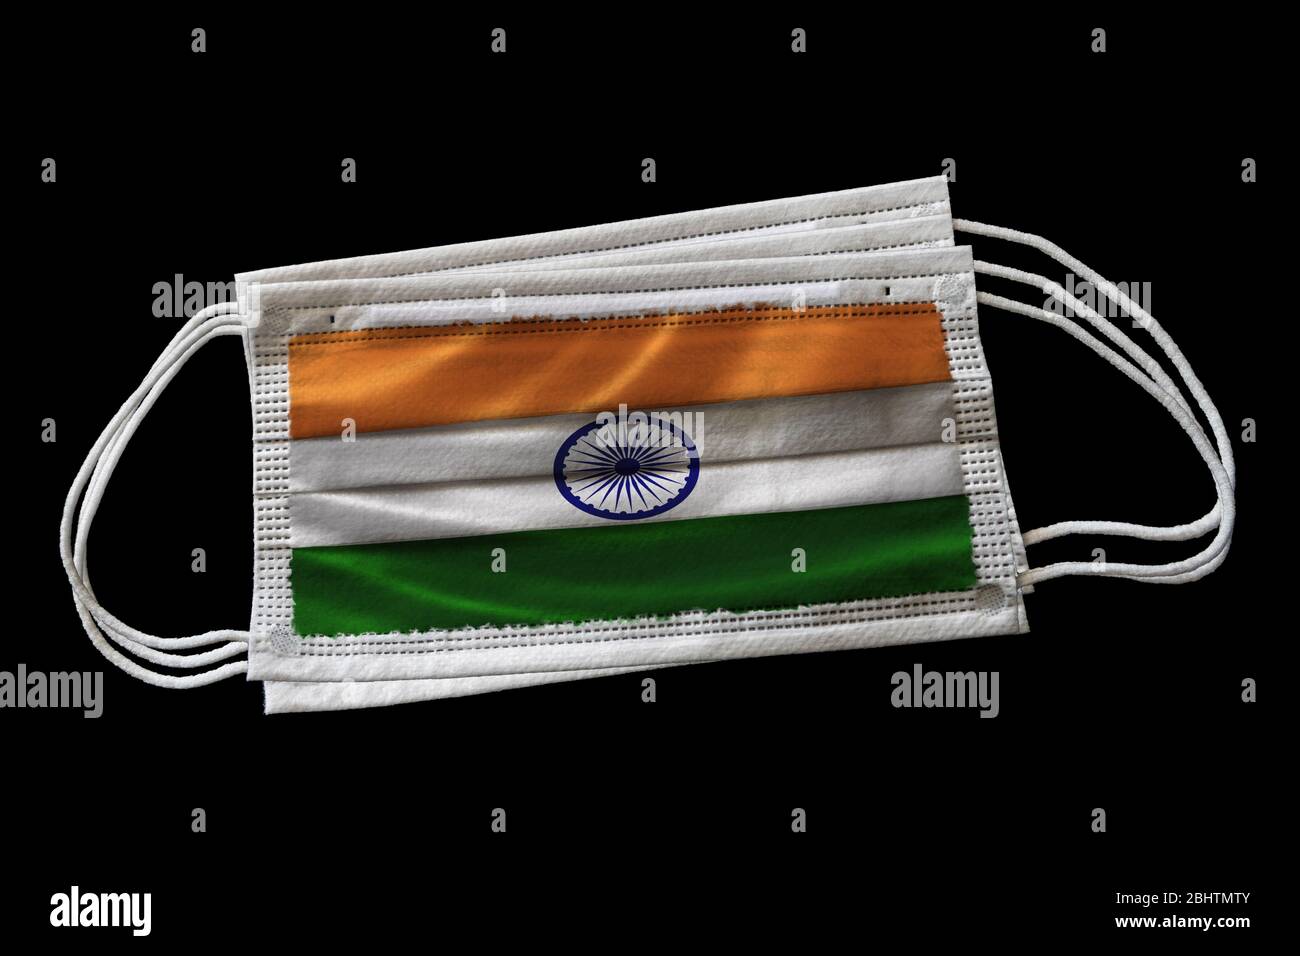 Surgical face masks with India flag printed. Isolated on black background. Concept of face mask usage in the Indian effort to combat Covid-19 coronavi Stock Photo